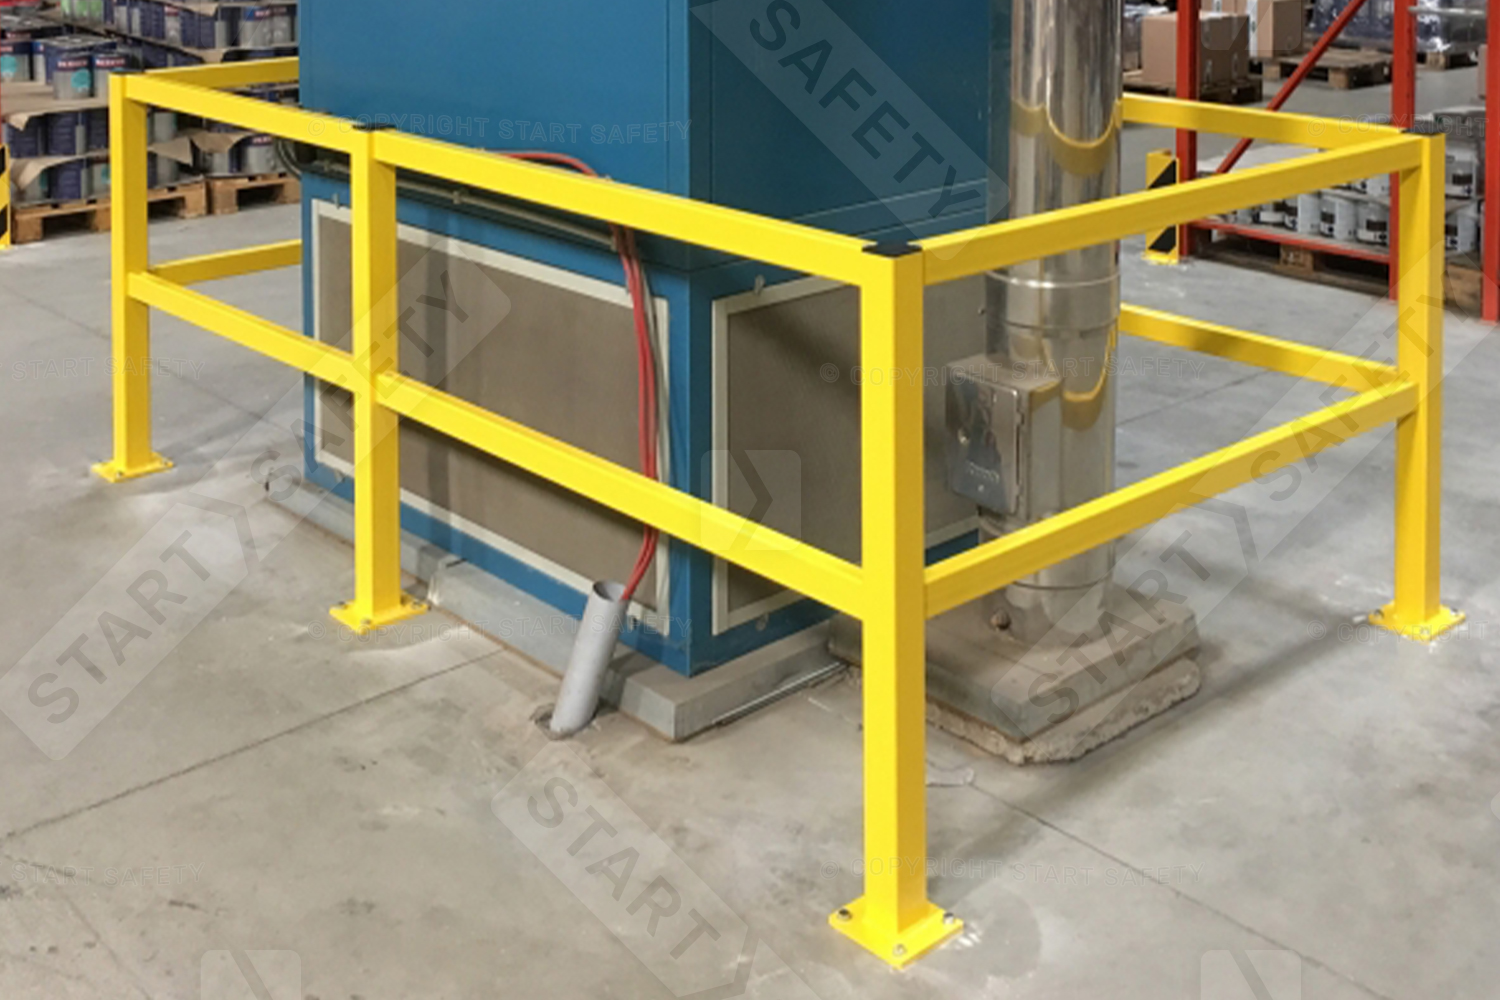 Black Bull MD Warehouse Barrier Kit Enclosure With Corners Around Machinery